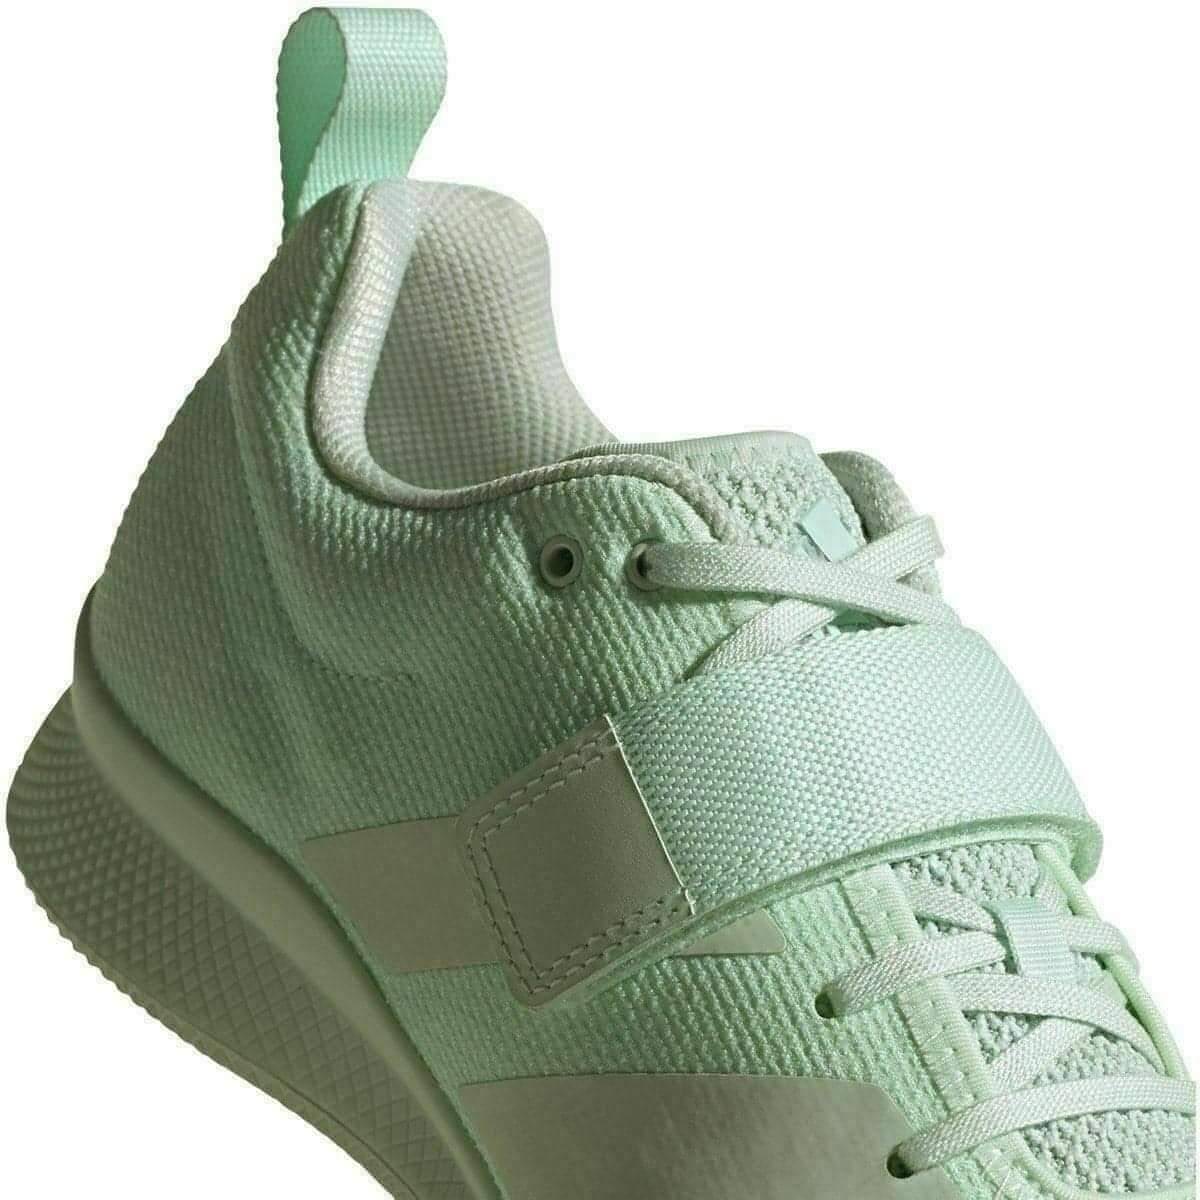 adidas AdiPower II Womens Weightlifting Shoes - Green - Start Fitness